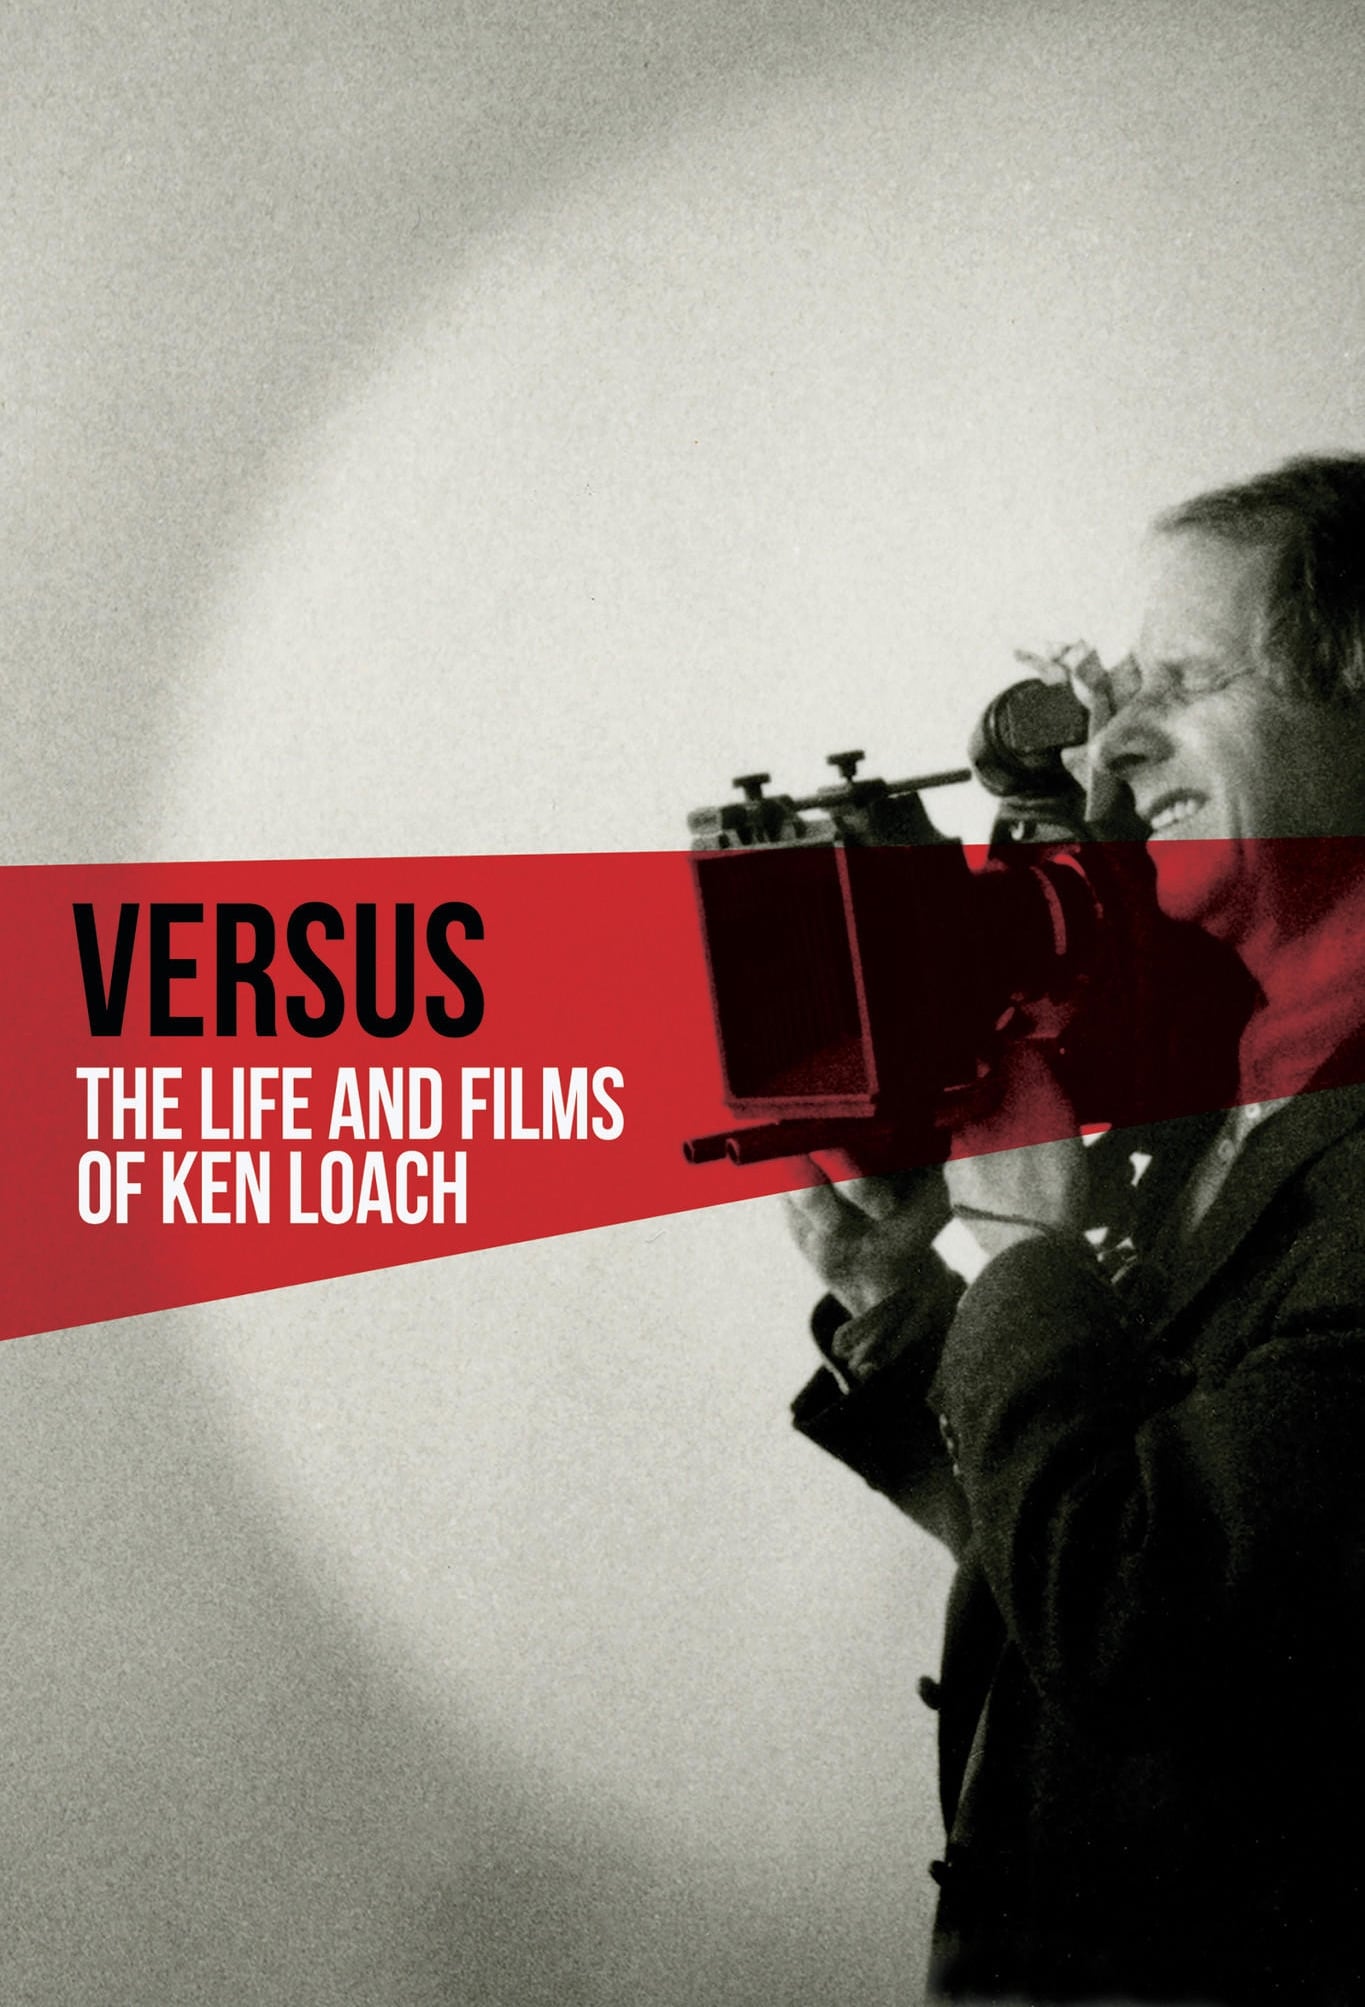 VERSUS - THE LIFE AND FILMS OF KEN LOACH